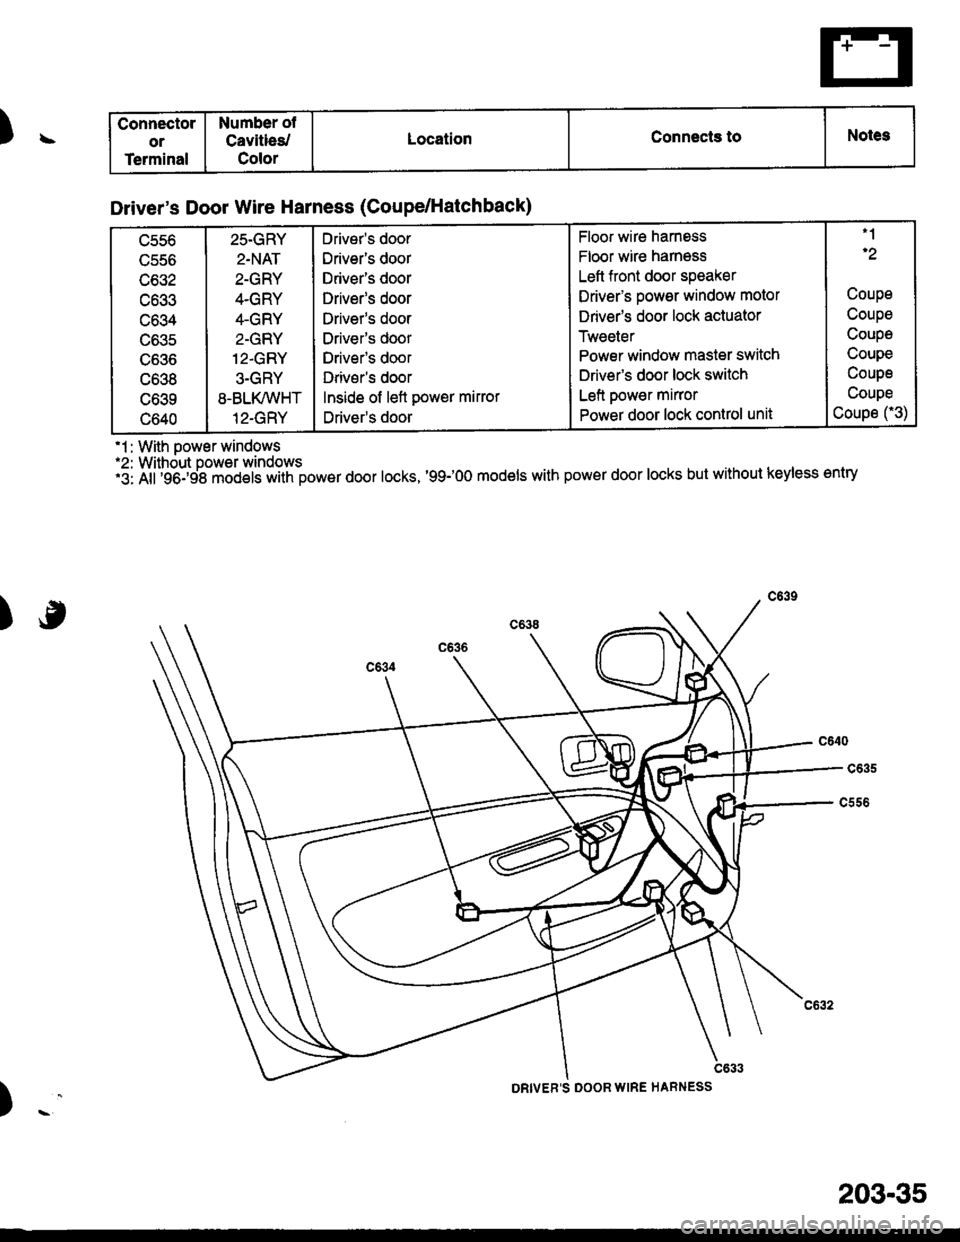 HONDA CIVIC 1996 6.G Service Manual )\
.1 : With oower windows*2: Without power windows.5 nii;gO: Sle models with power door locks, 99-OO models with power door locks but without keyless entry
)
Connector
or
Terminal
Number ot
Cavit